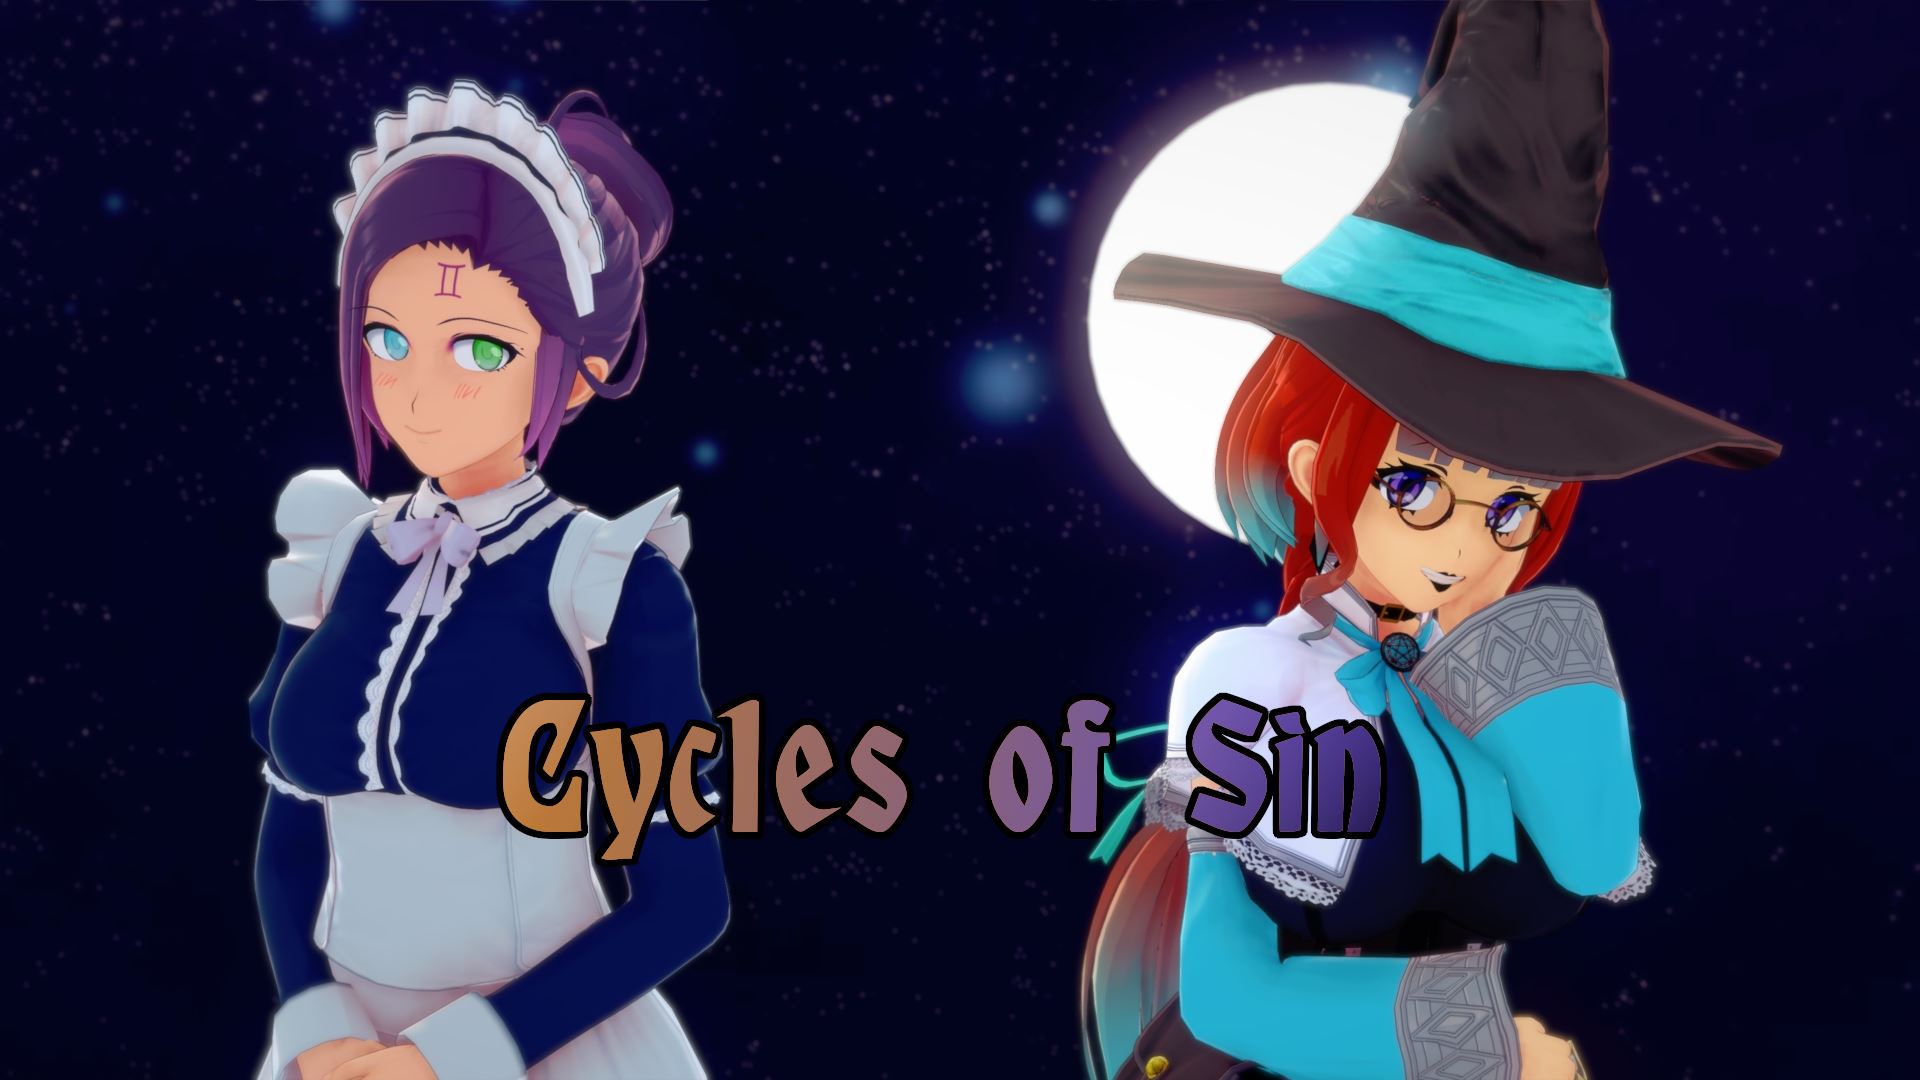 Xxx Sine - Cycles of Sin Ren'Py Porn Sex Game v.0.0.2 Download for Windows, MacOS,  Linux, Android